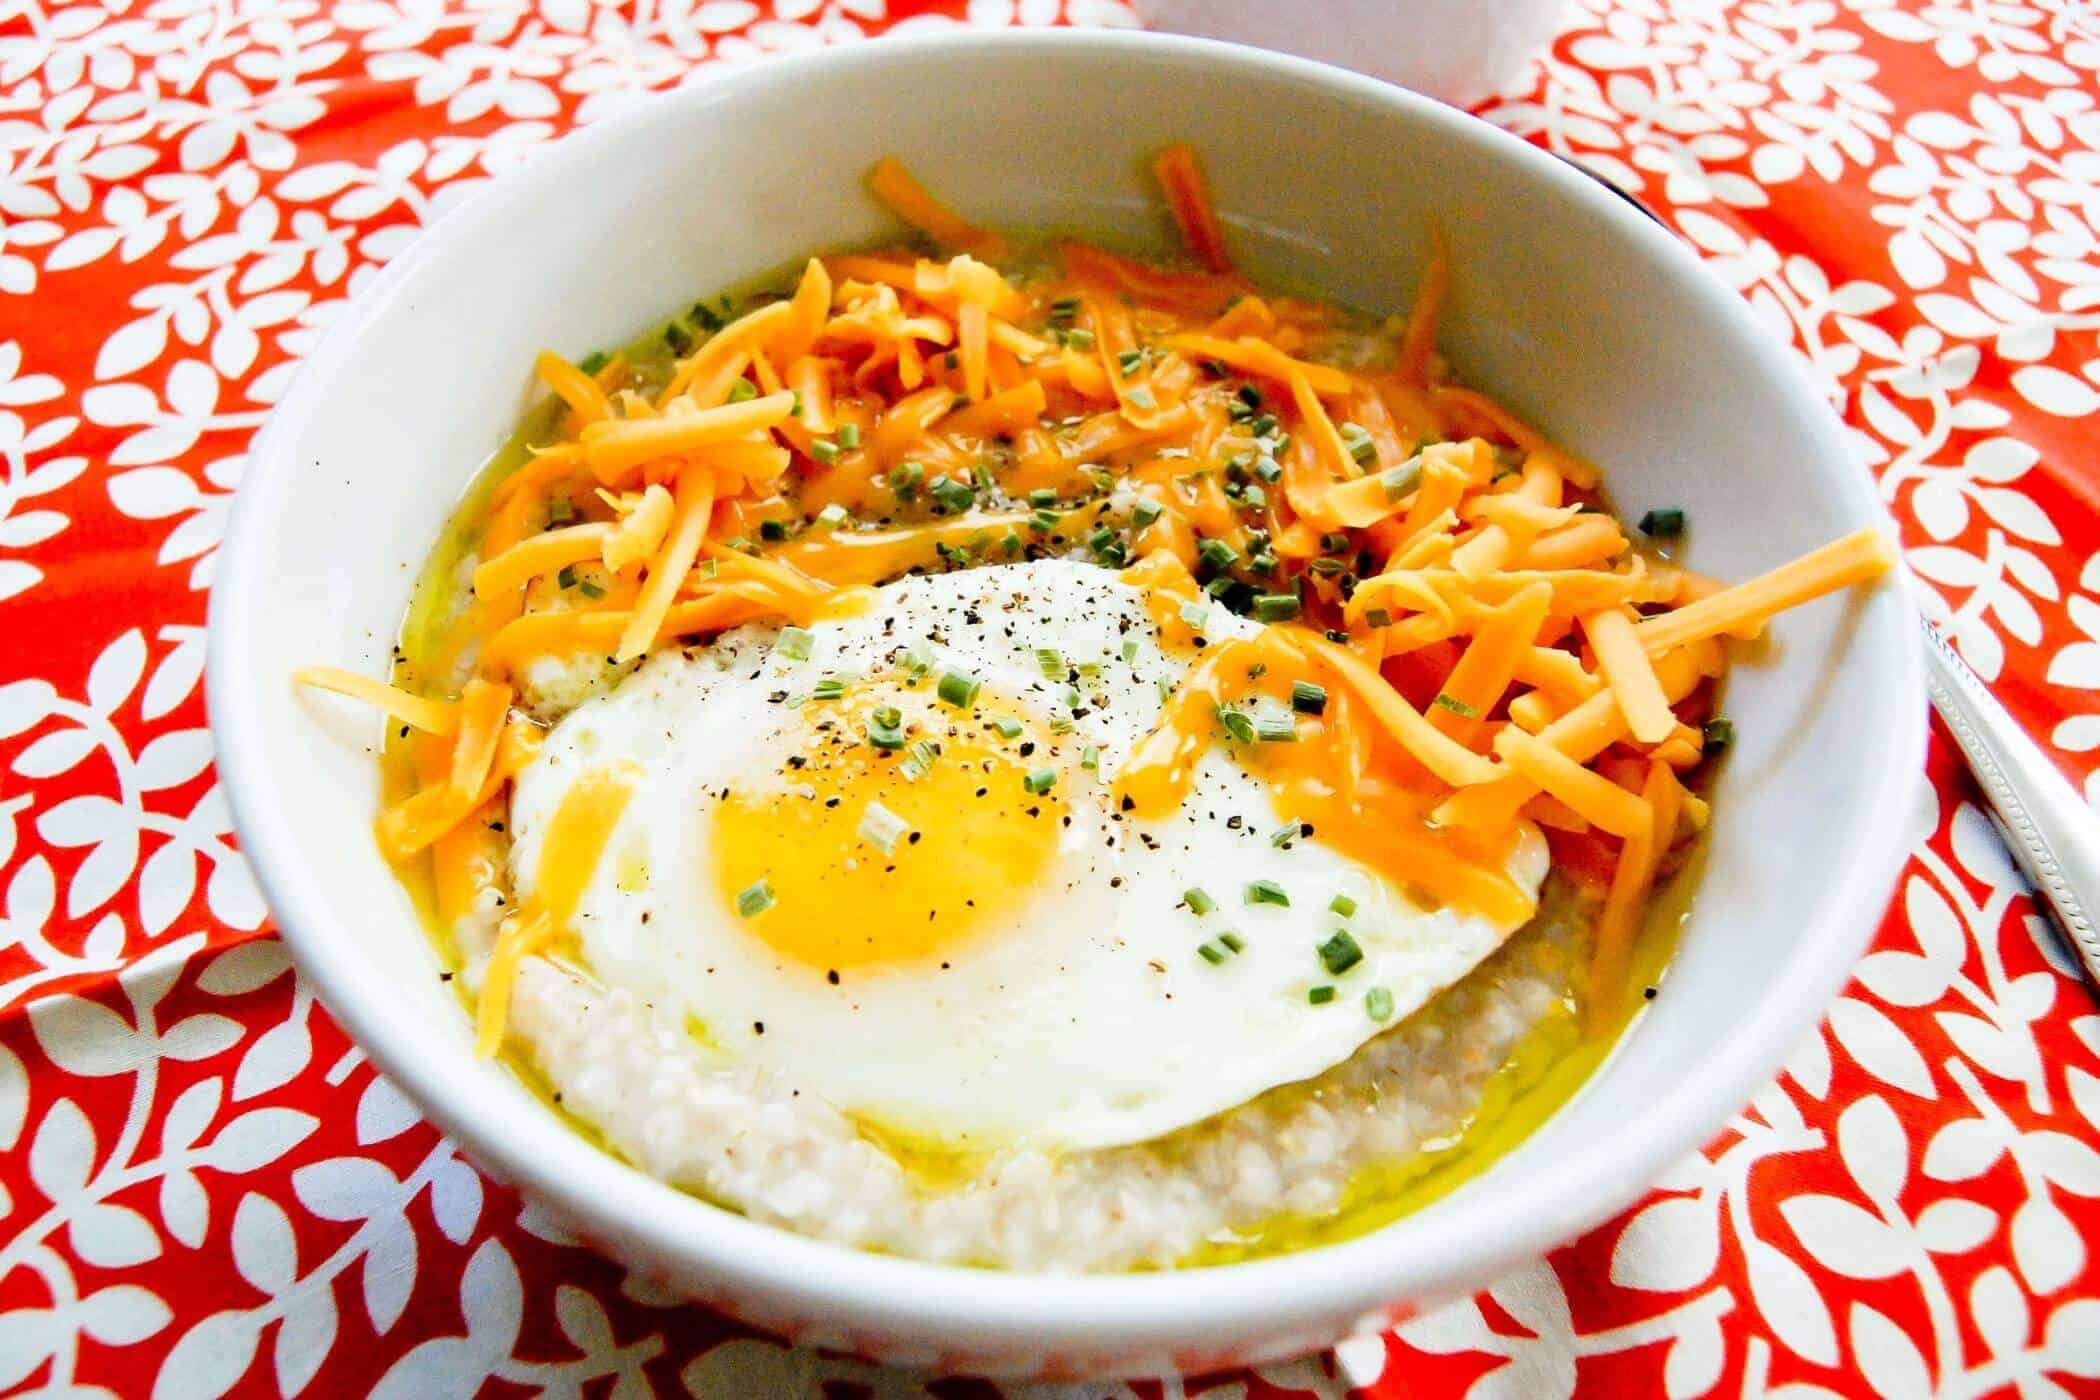 savory steel cut oats with egg, cheese and herbs in bowl.